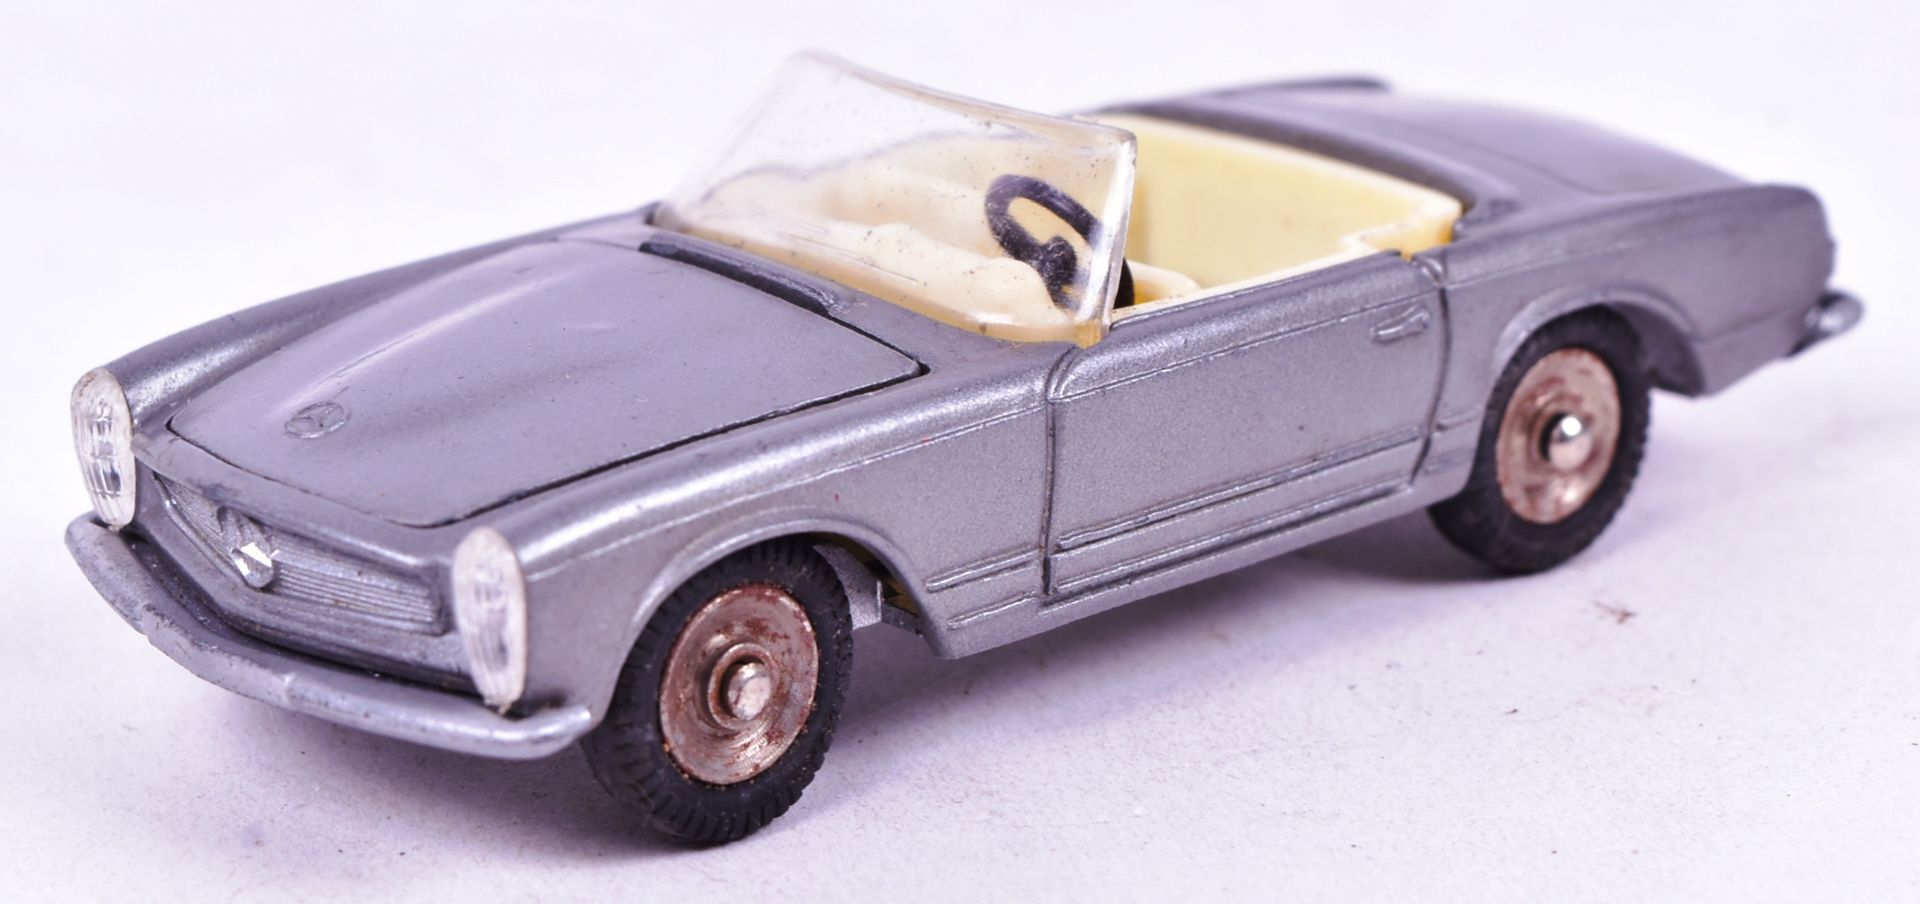 DIECAST - FRENCH DINKY TOYS - MERCEDES BENZ 230 SL - Image 2 of 5